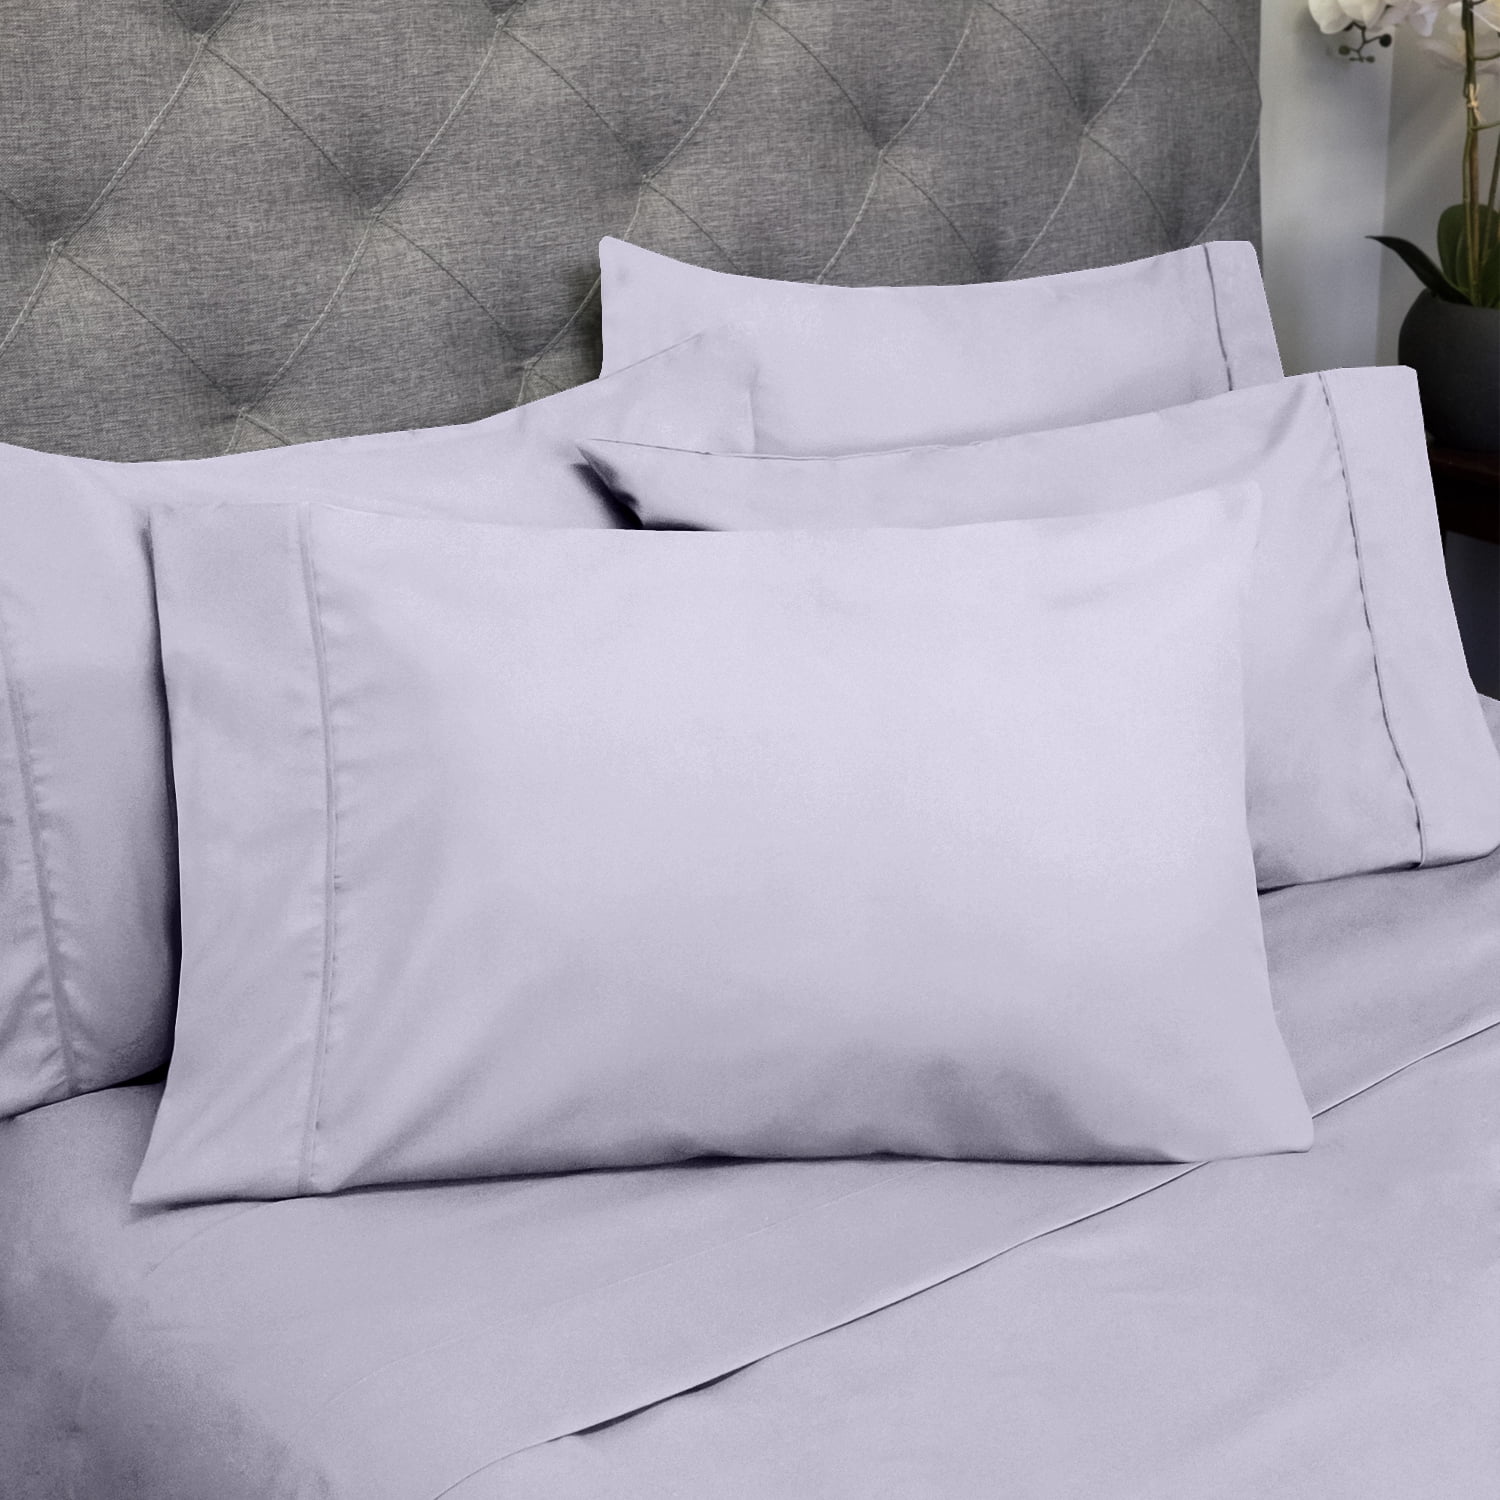 Details about   Select Solid Color Fitted Sheet+2 Pillow Case 1000TC Egyptian Cotton US Cal King 